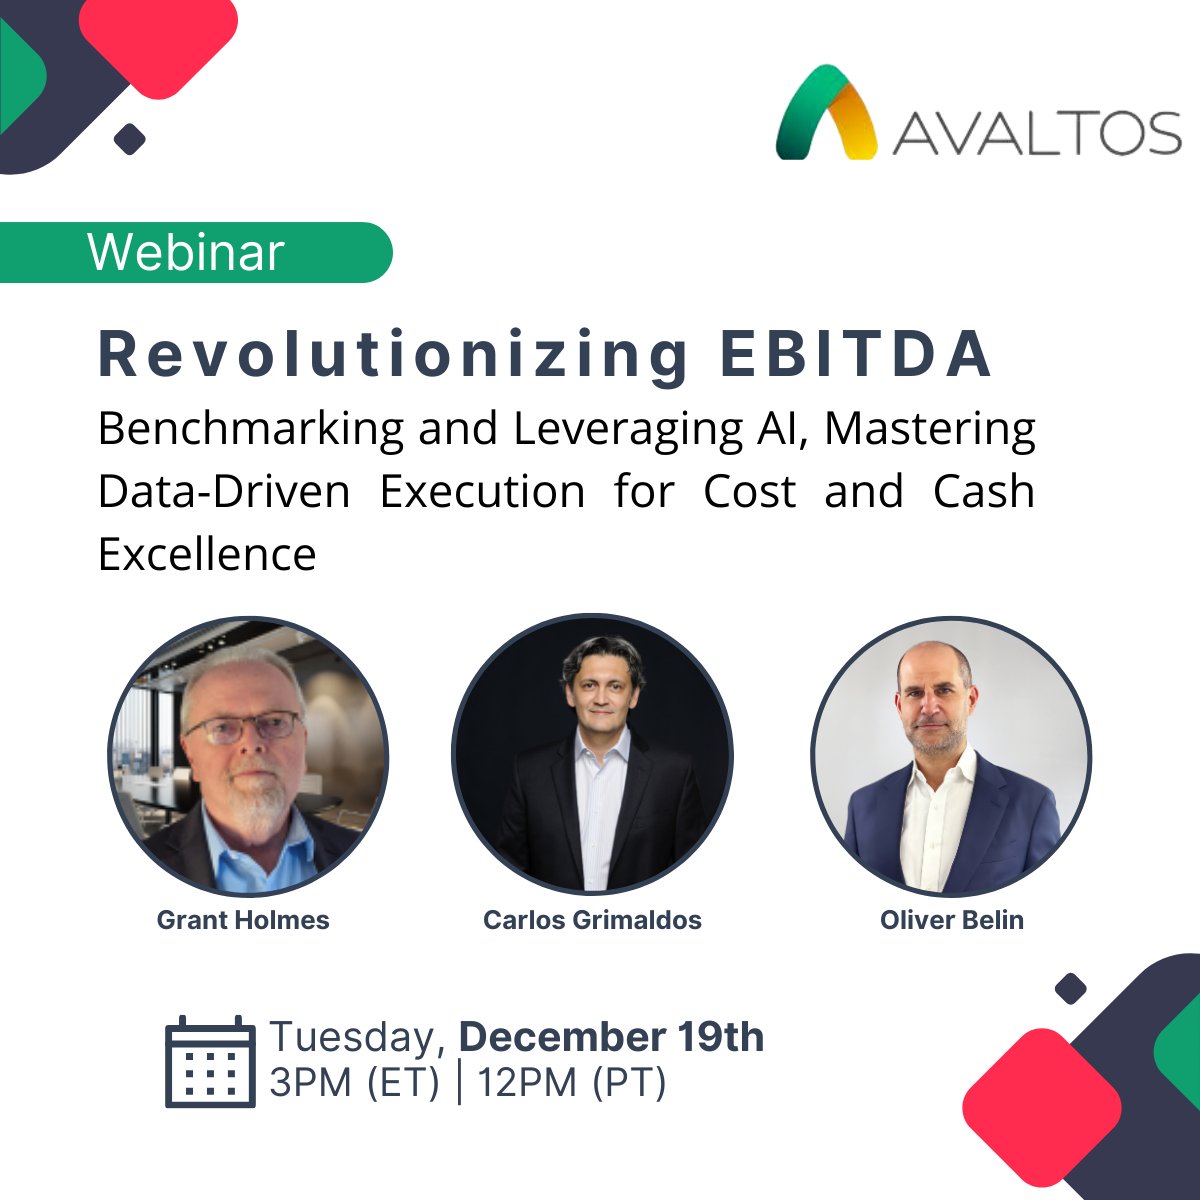 Join us on December 19th for insights on Revolutionizing EBITDA with data intelligence and benchmarking strategies. Take a proactive approach to cost efficiency and cash flow management now! Register to secure your spot: us06web.zoom.us/webinar/regist… #webinar #dataintelligence #data